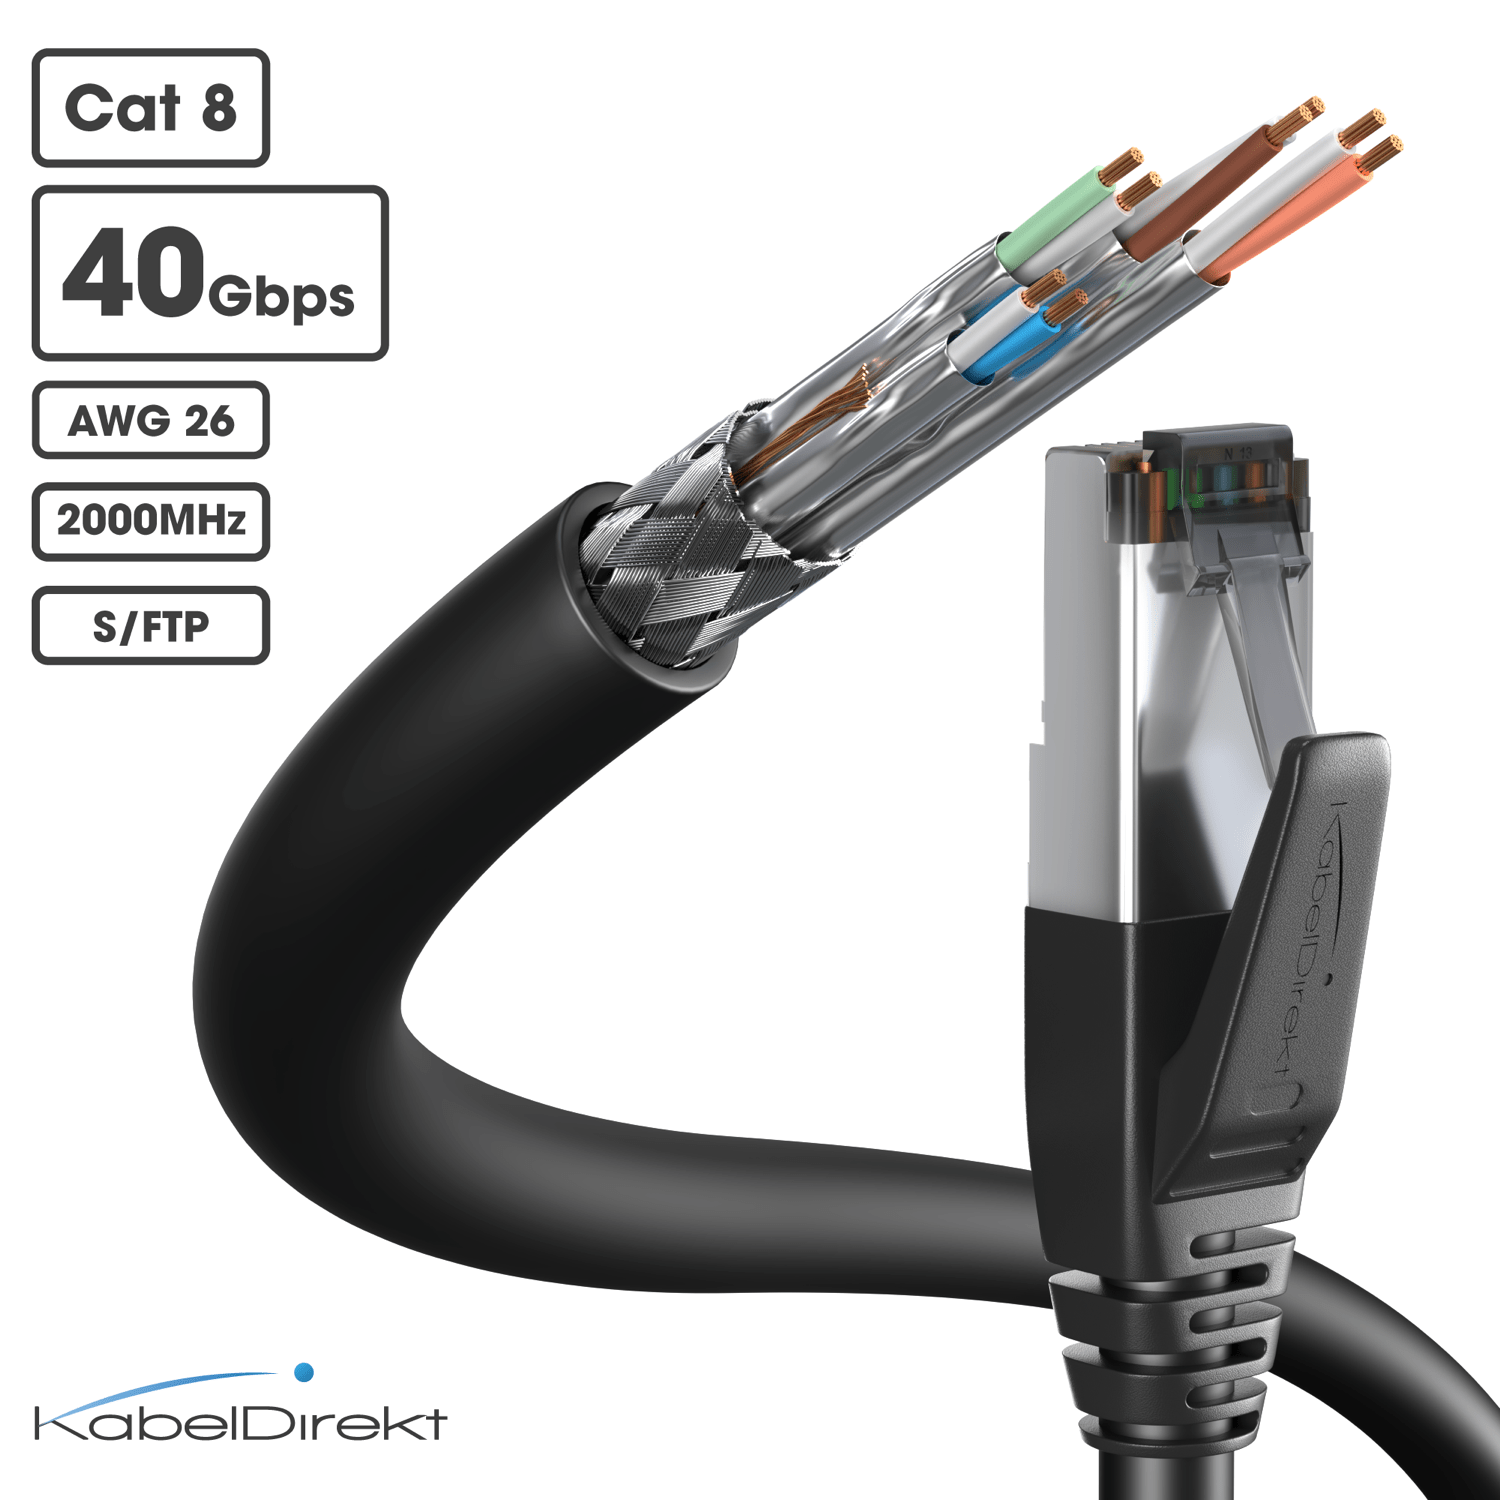 Gigacord 50Ft Cat 8 Ethernet LAN Cable, 26AWG Nylon Braided 40Gbps